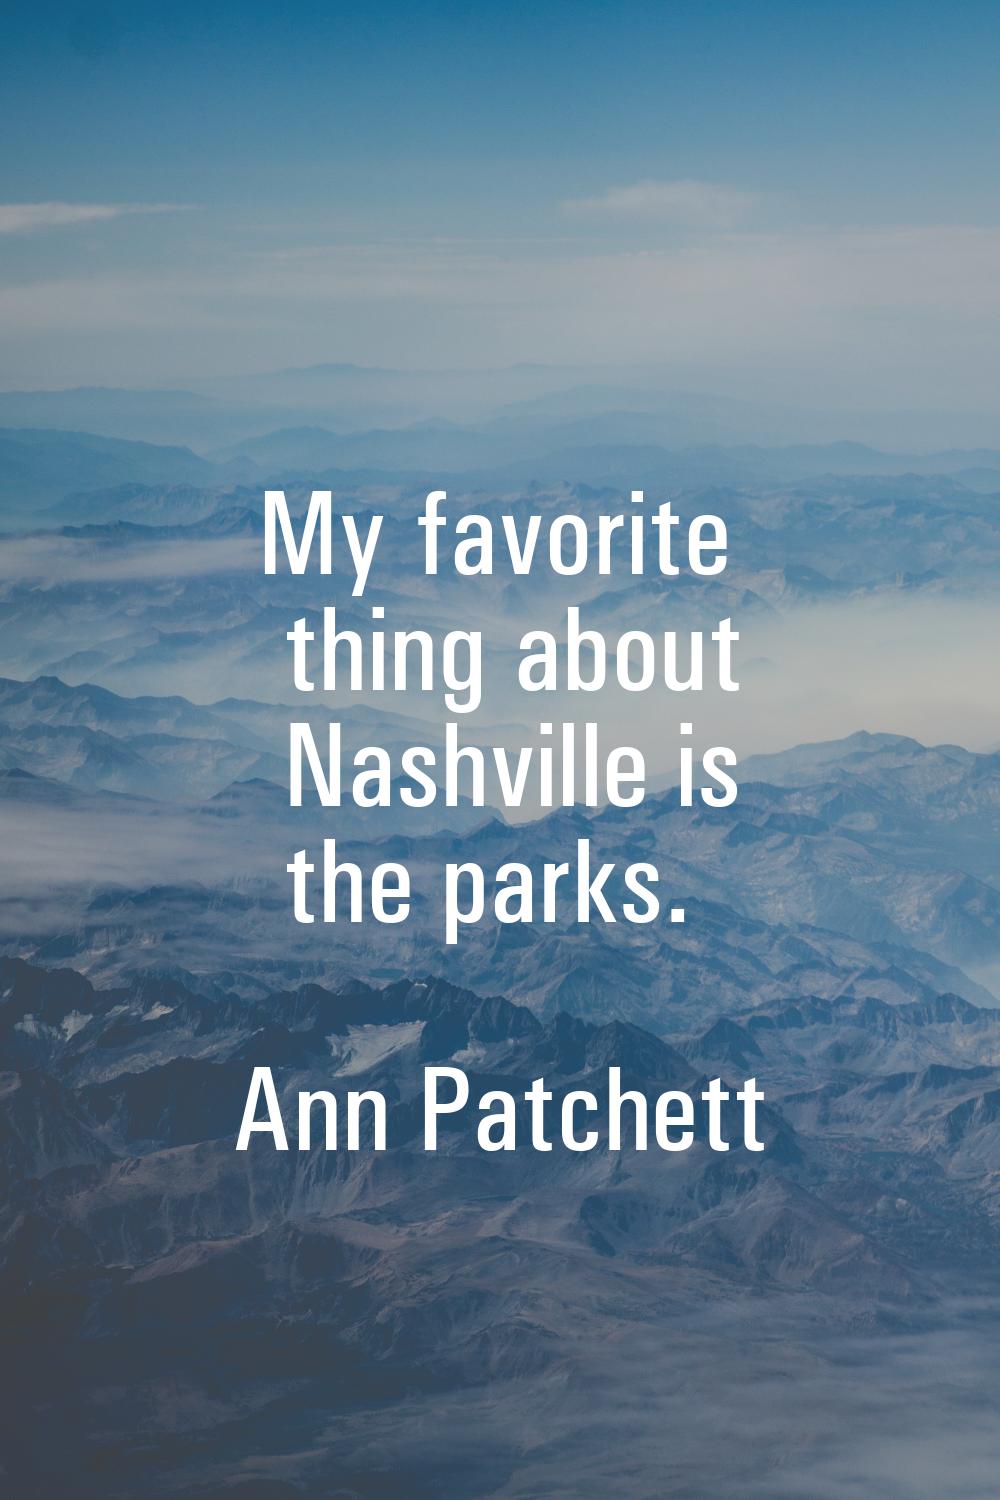 My favorite thing about Nashville is the parks.